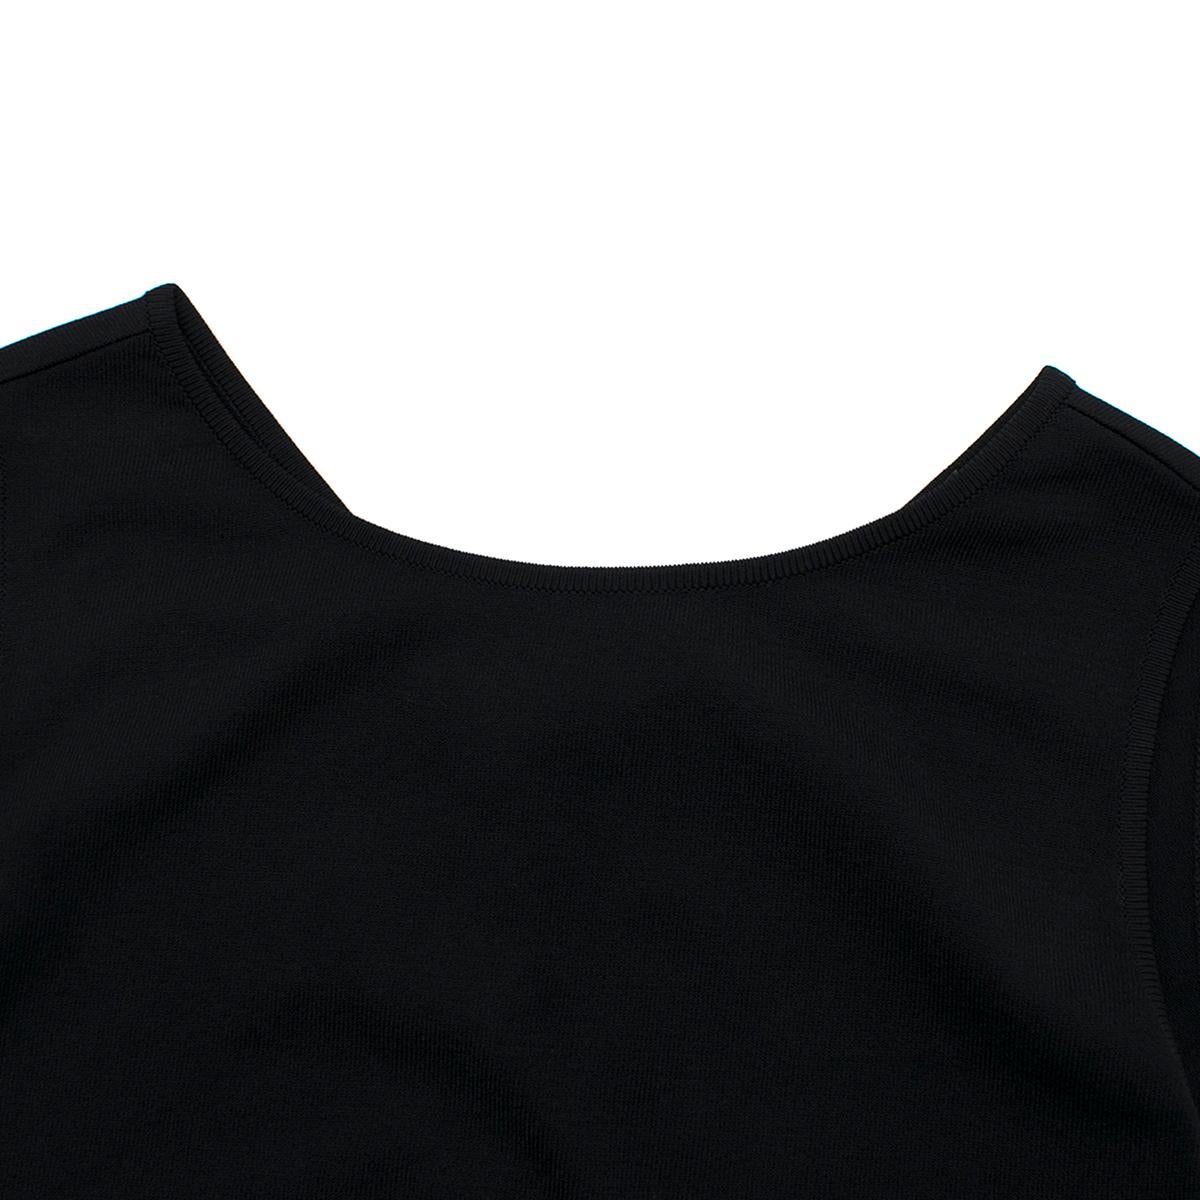 Gucci Black Fitted Sleeveless Top - Size M 1